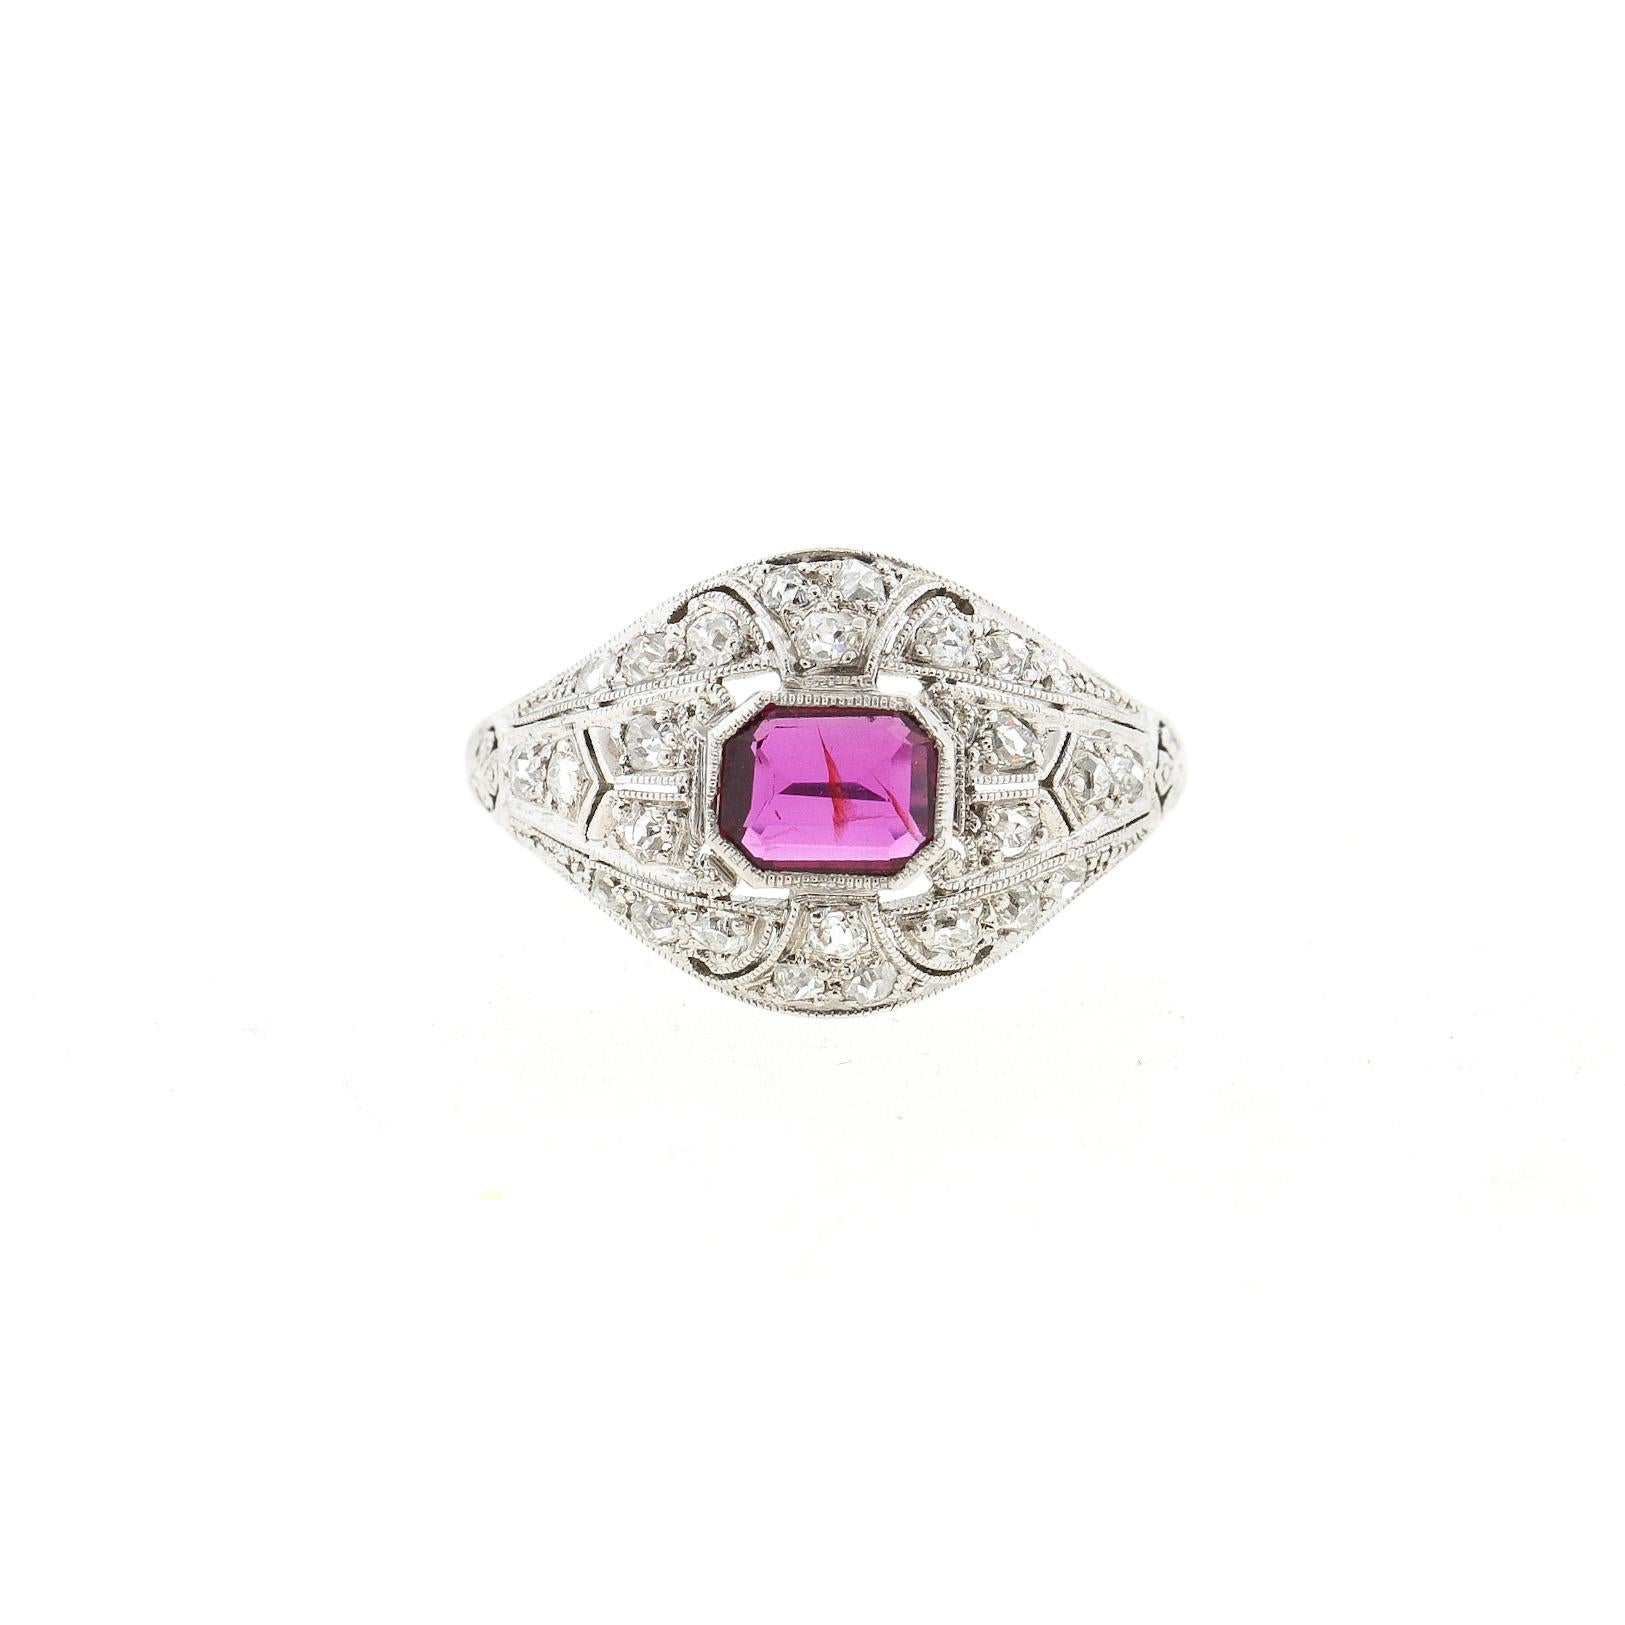 Antique Art Deco Platinum Diamond Ruby Ring In Good Condition For Sale In New York, NY